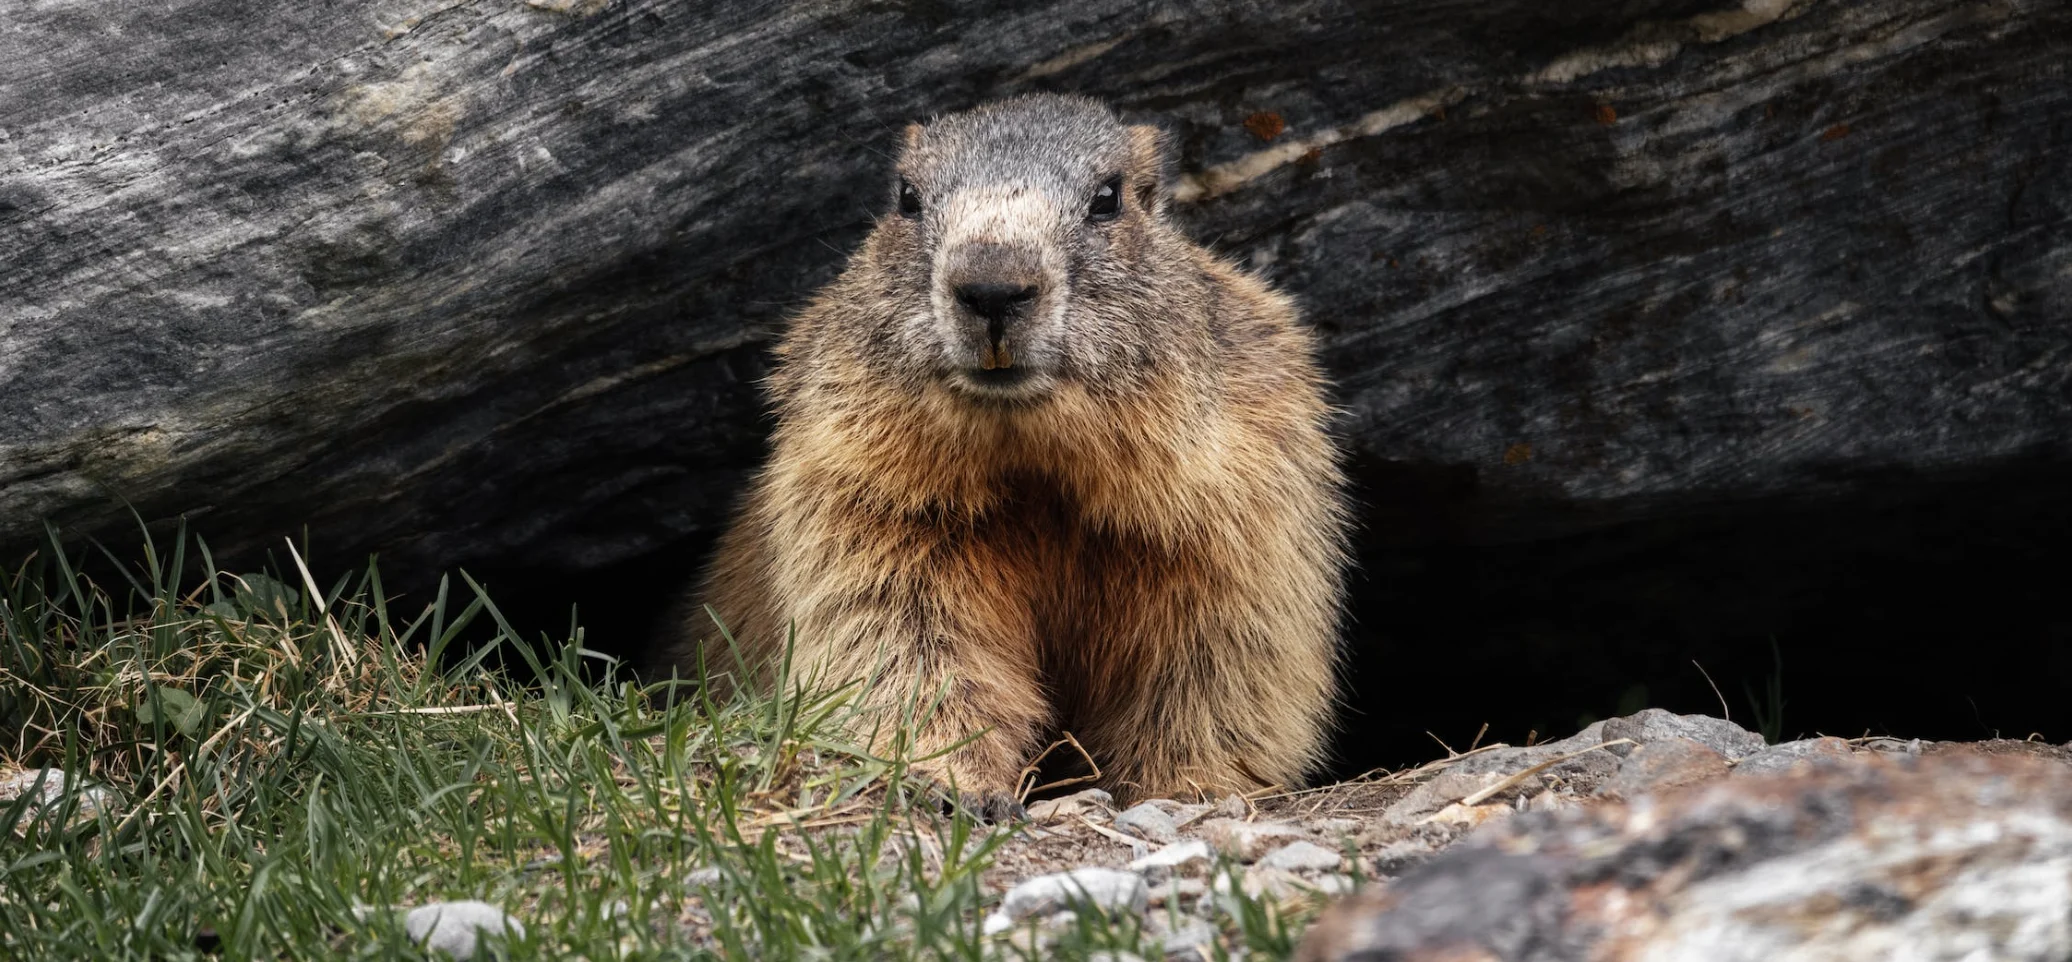 Why do groundhogs emerge on February 2 if it’s not to predict the weather?